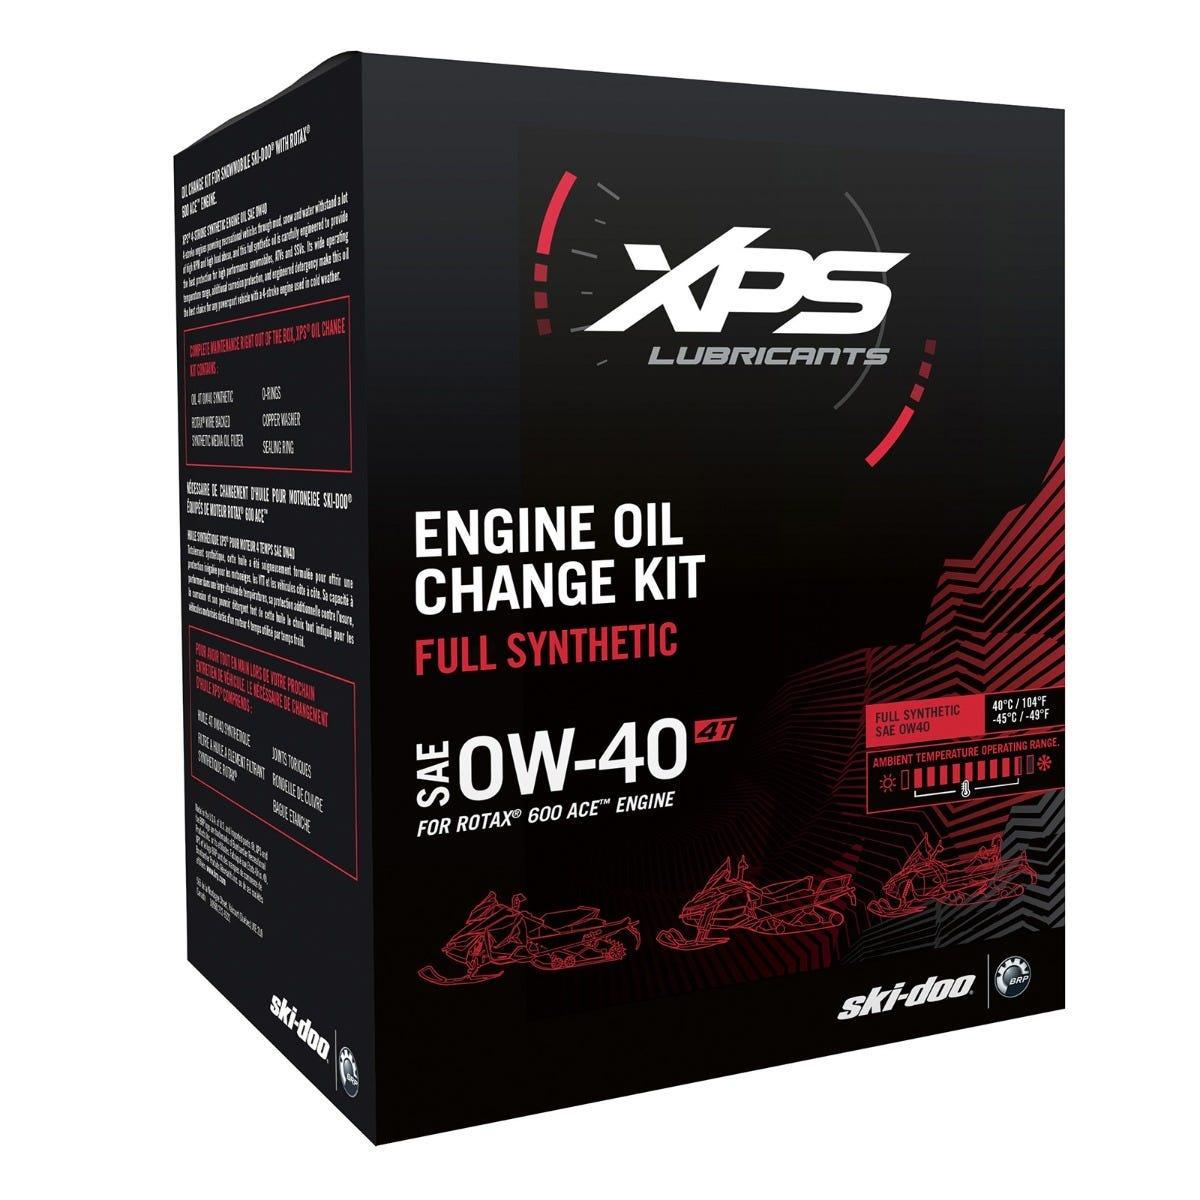 4T 0W-40 Synthetic Oil Change Kit for Rotax 1200 4-TEC engine - Factory Recreation